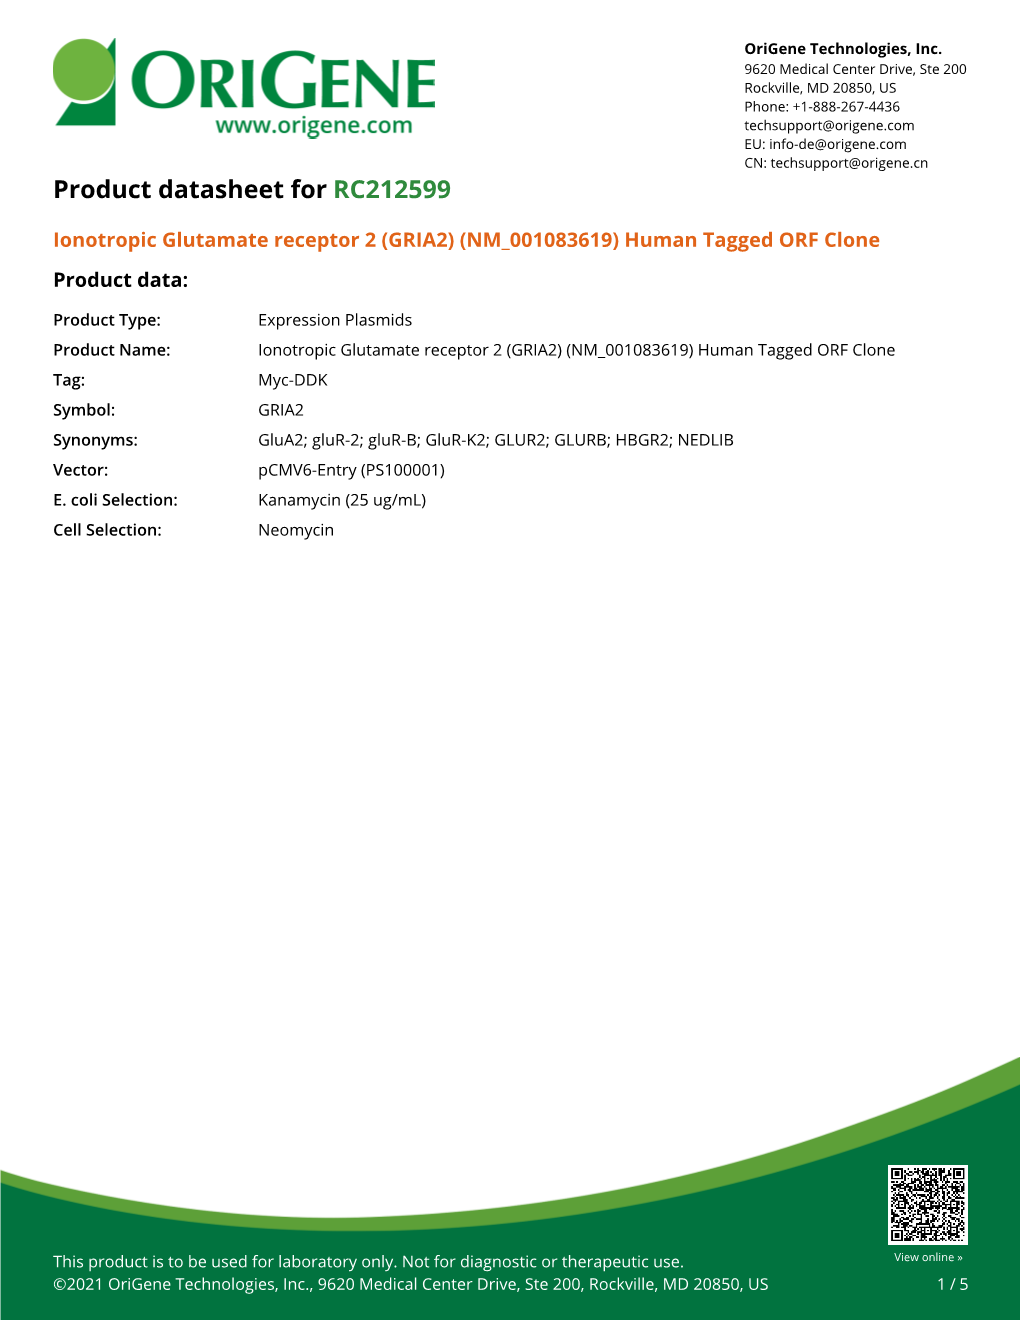 Ionotropic Glutamate Receptor 2 (GRIA2) (NM 001083619) Human Tagged ORF Clone Product Data